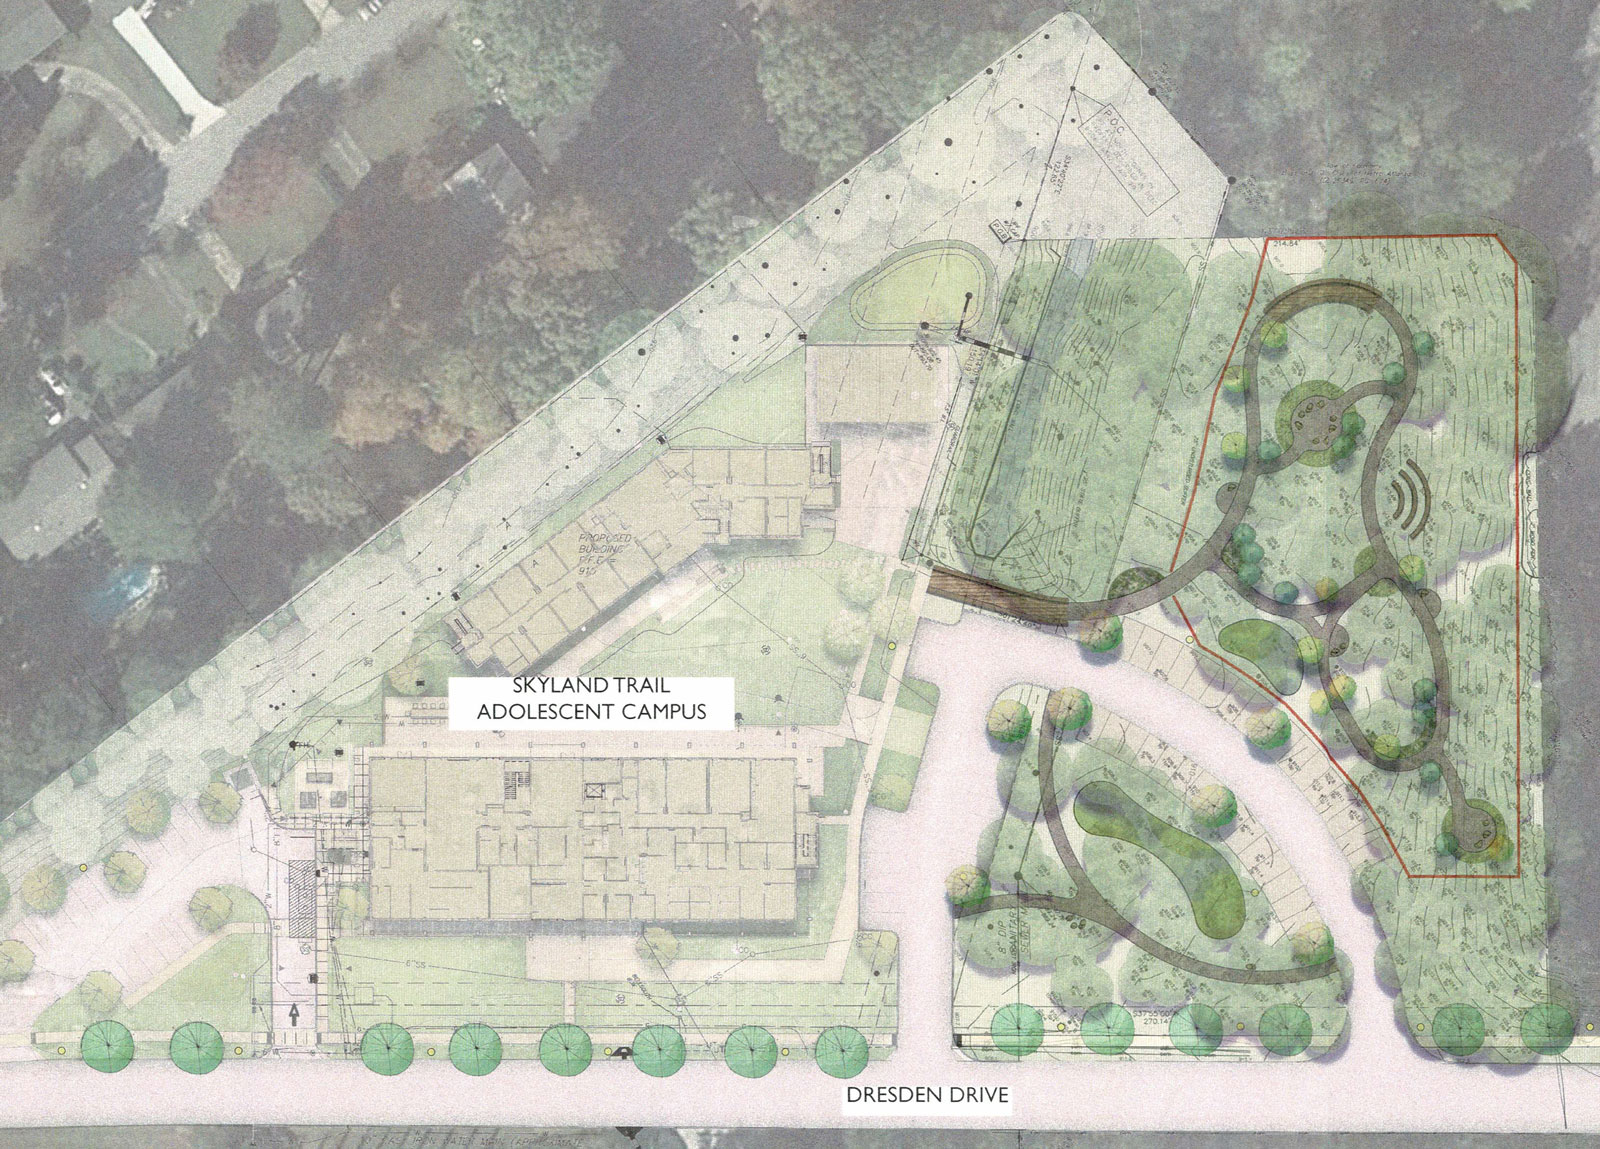 architectural drawing showing plans for 1.99 acre property adjacent to adolescent campus